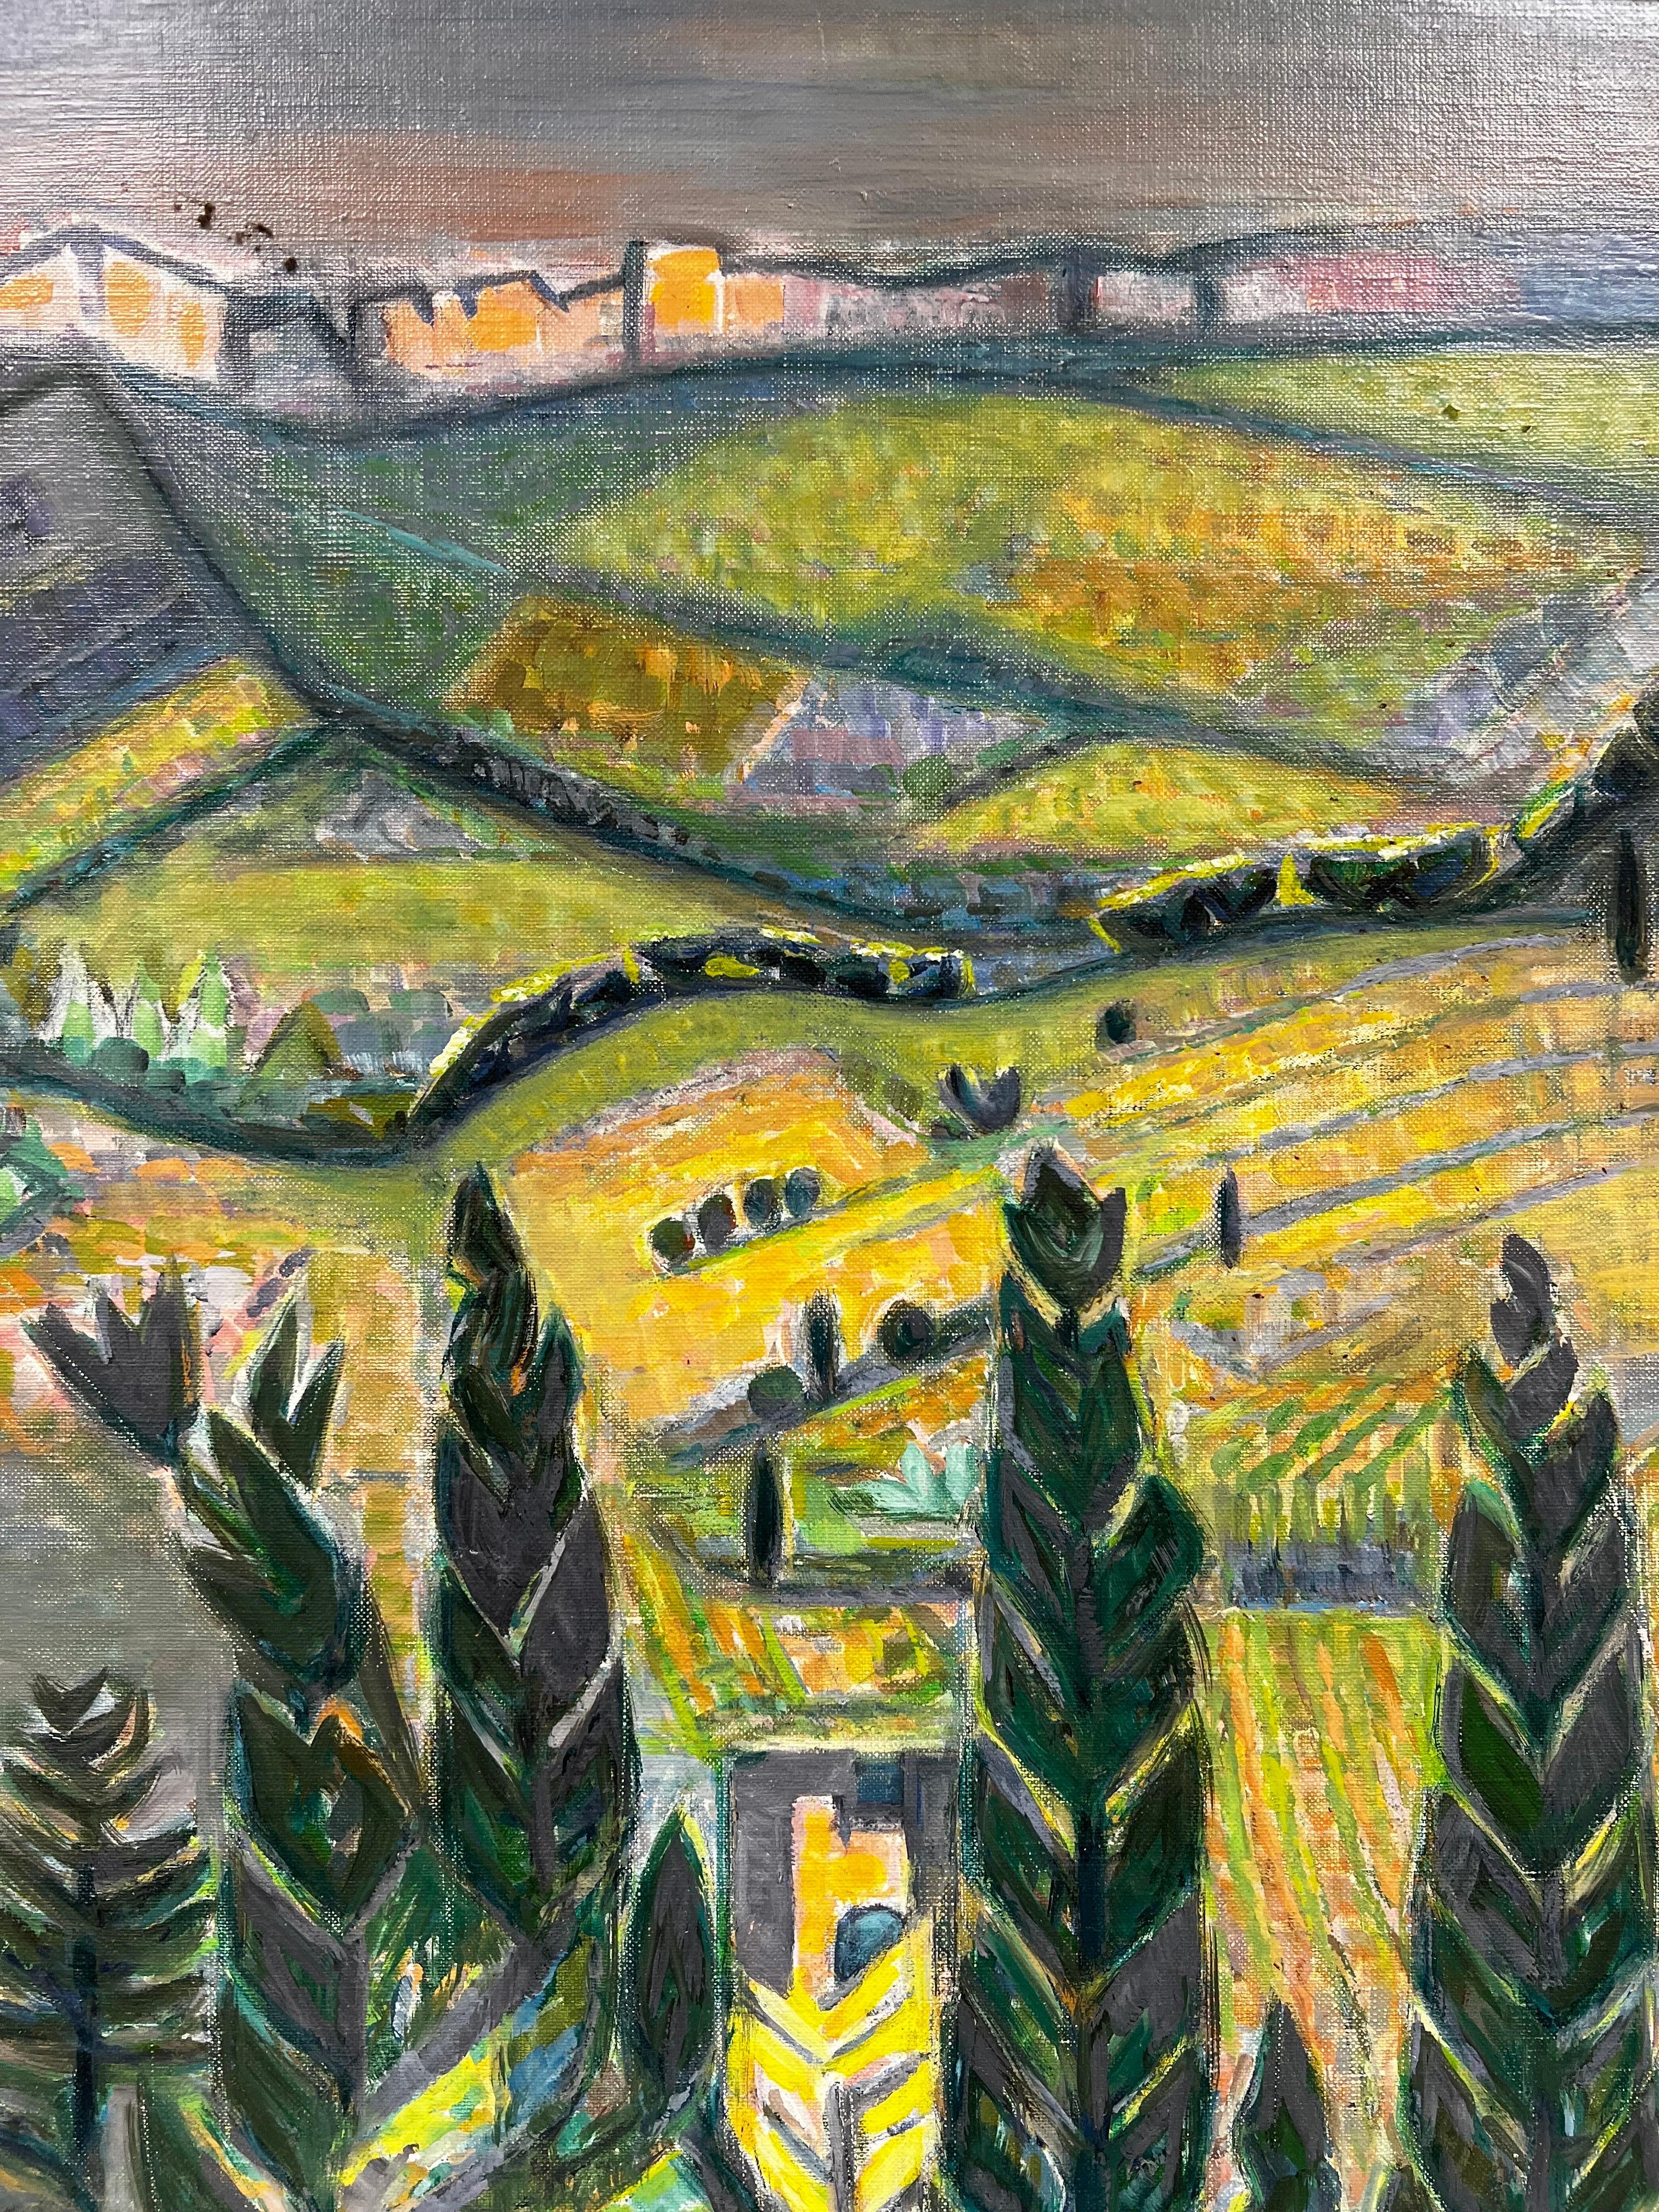 Artist/ School: French School, late 20th century, signed 

Title: Provencal Landscape

Medium: oil on canvas, framed 

Framed: 28.5 x 22.5
Canvas : 24 x 19 inches

Provenance: private collection, France

Condition: The painting is in overall very